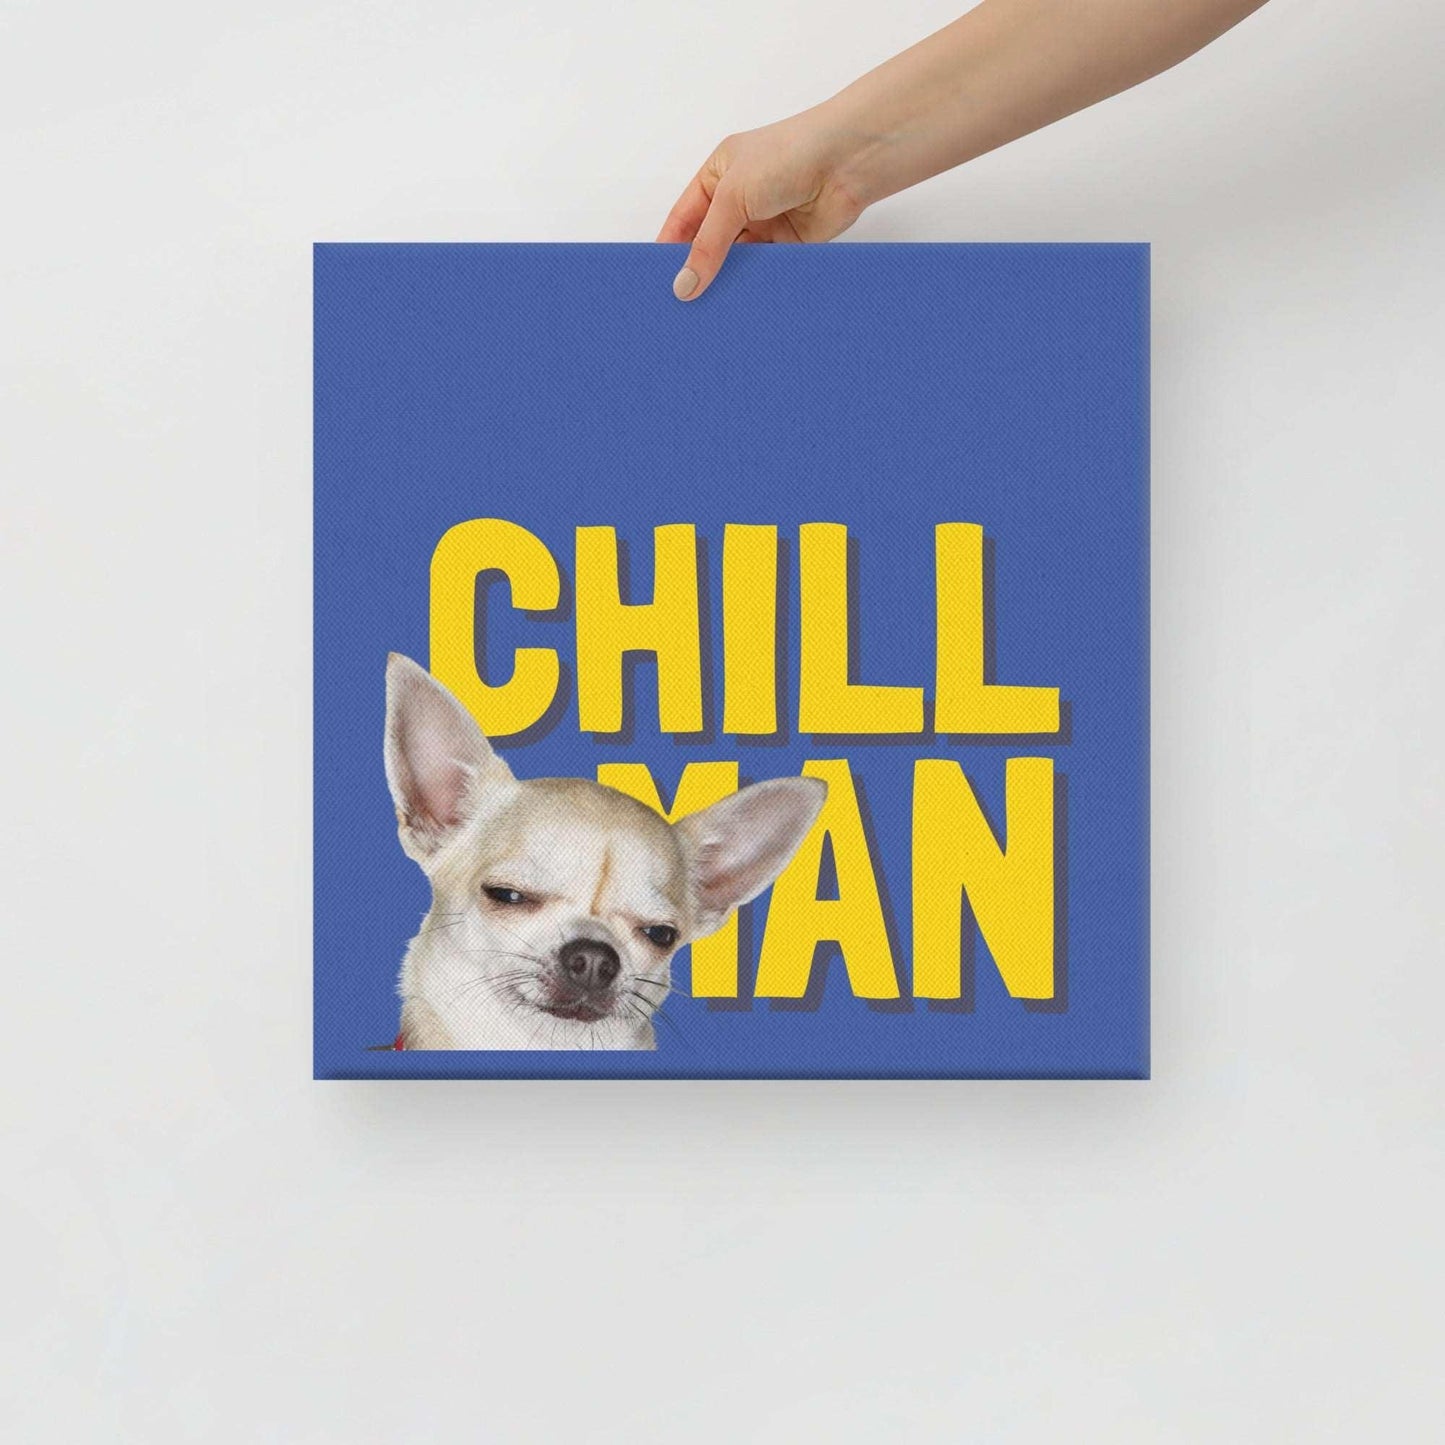 CHILL MAN - one of the famous Chimigos chihuahua memes.  This is a vivid and fade resistant art print on a stretched canvas. A super chill chi has just two words of advice for you: CHILL MAN. The perfect gift for anyone who needs to lighten up! Bright colours - blue and yellow.